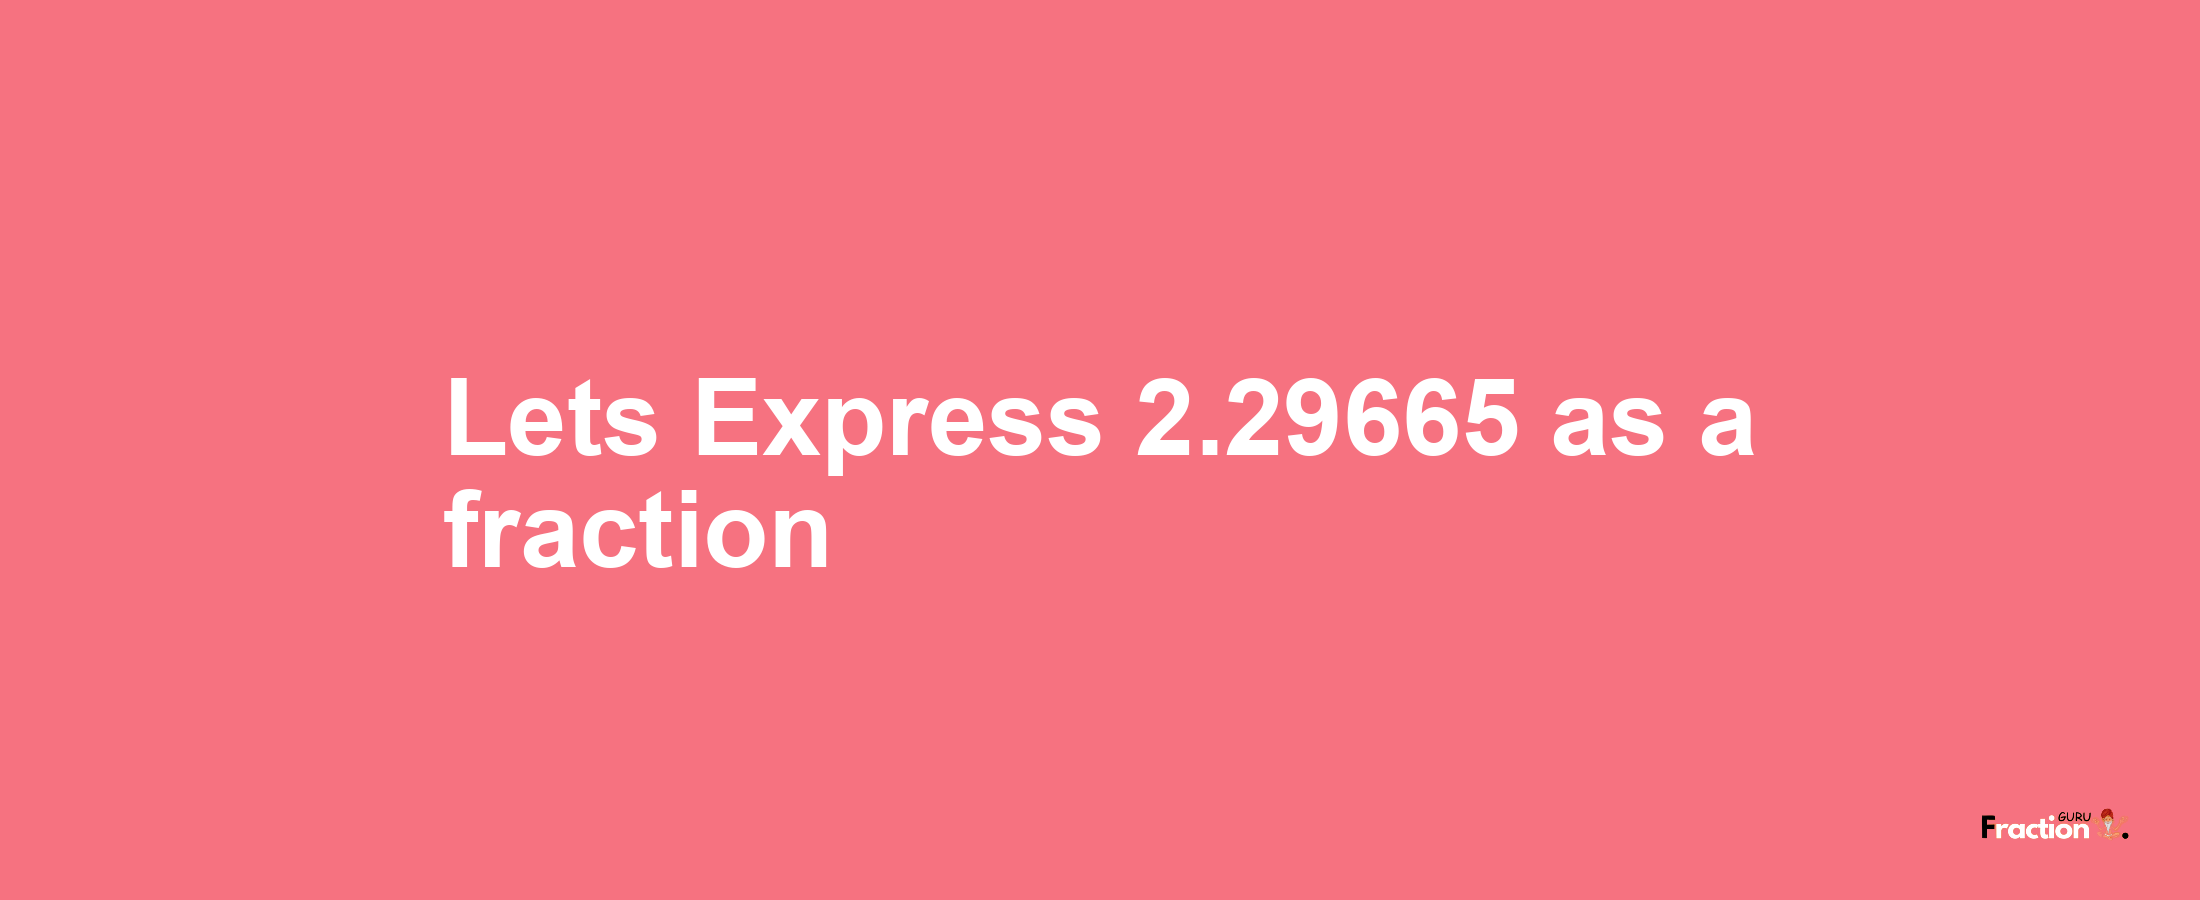 Lets Express 2.29665 as afraction